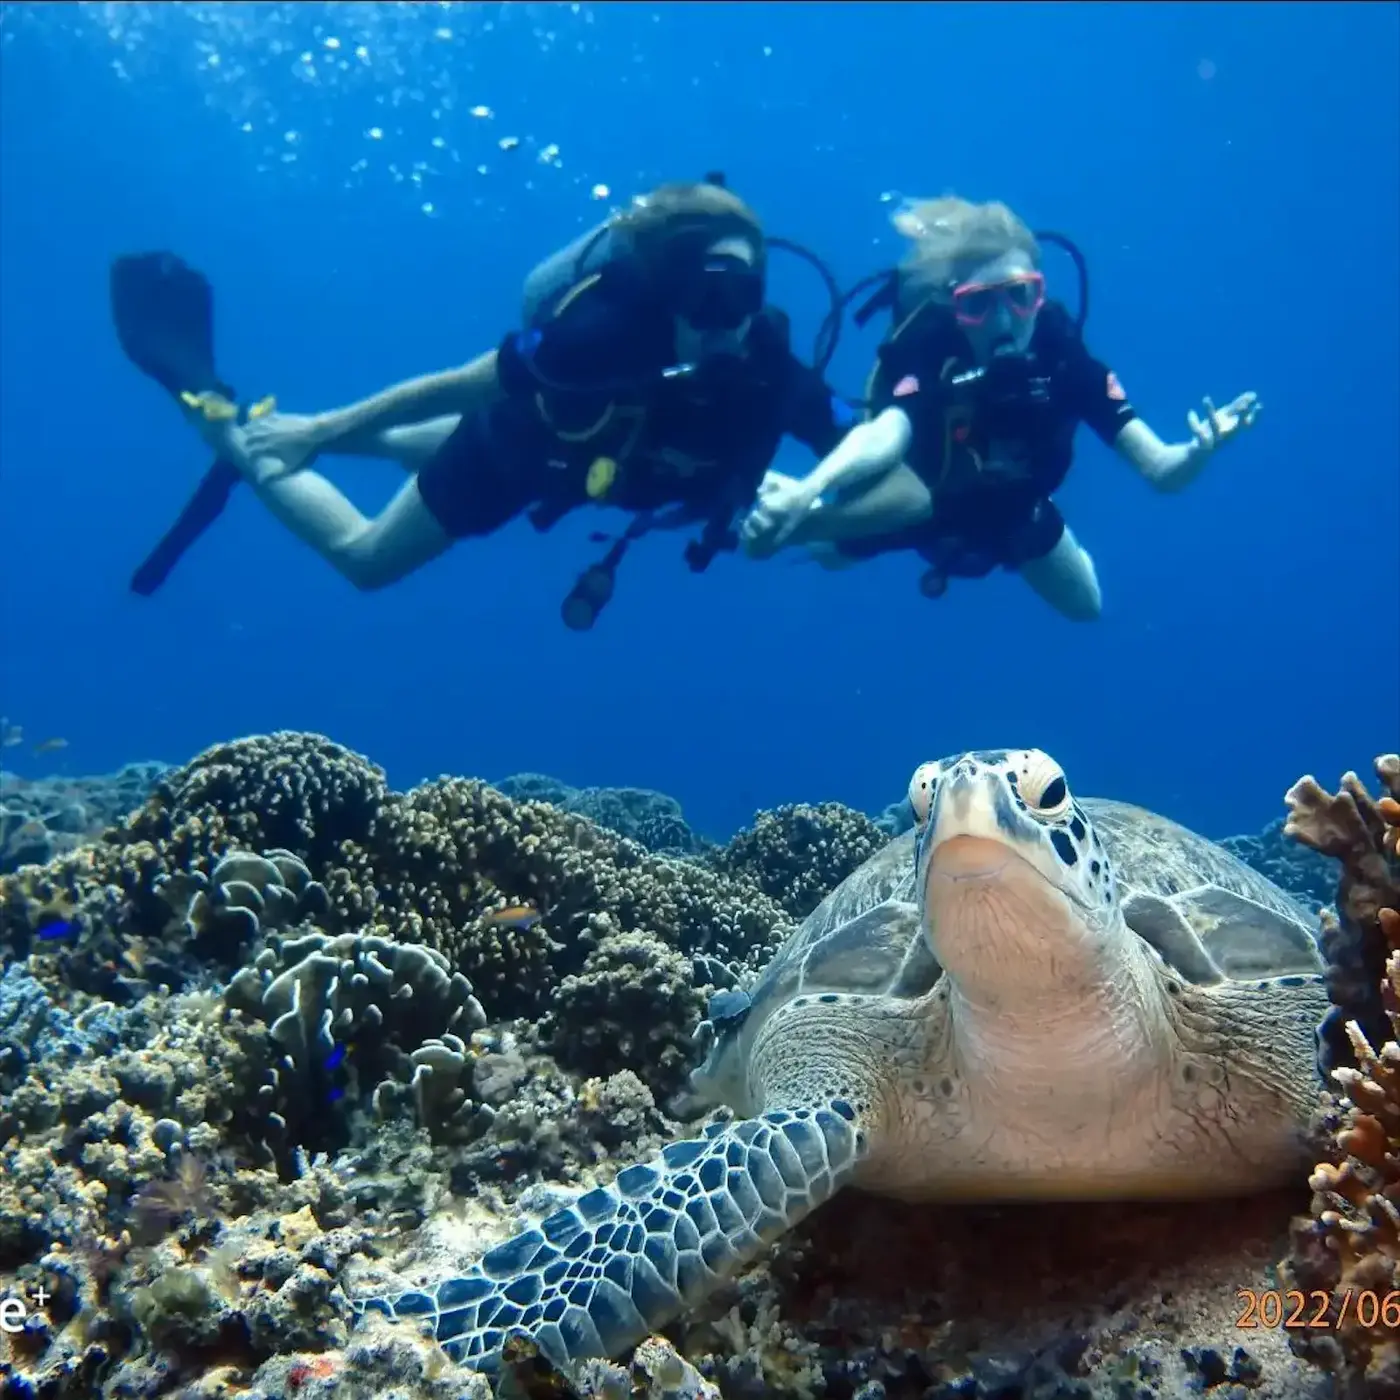 PADI Scuba Divers pictured behind a Turtle